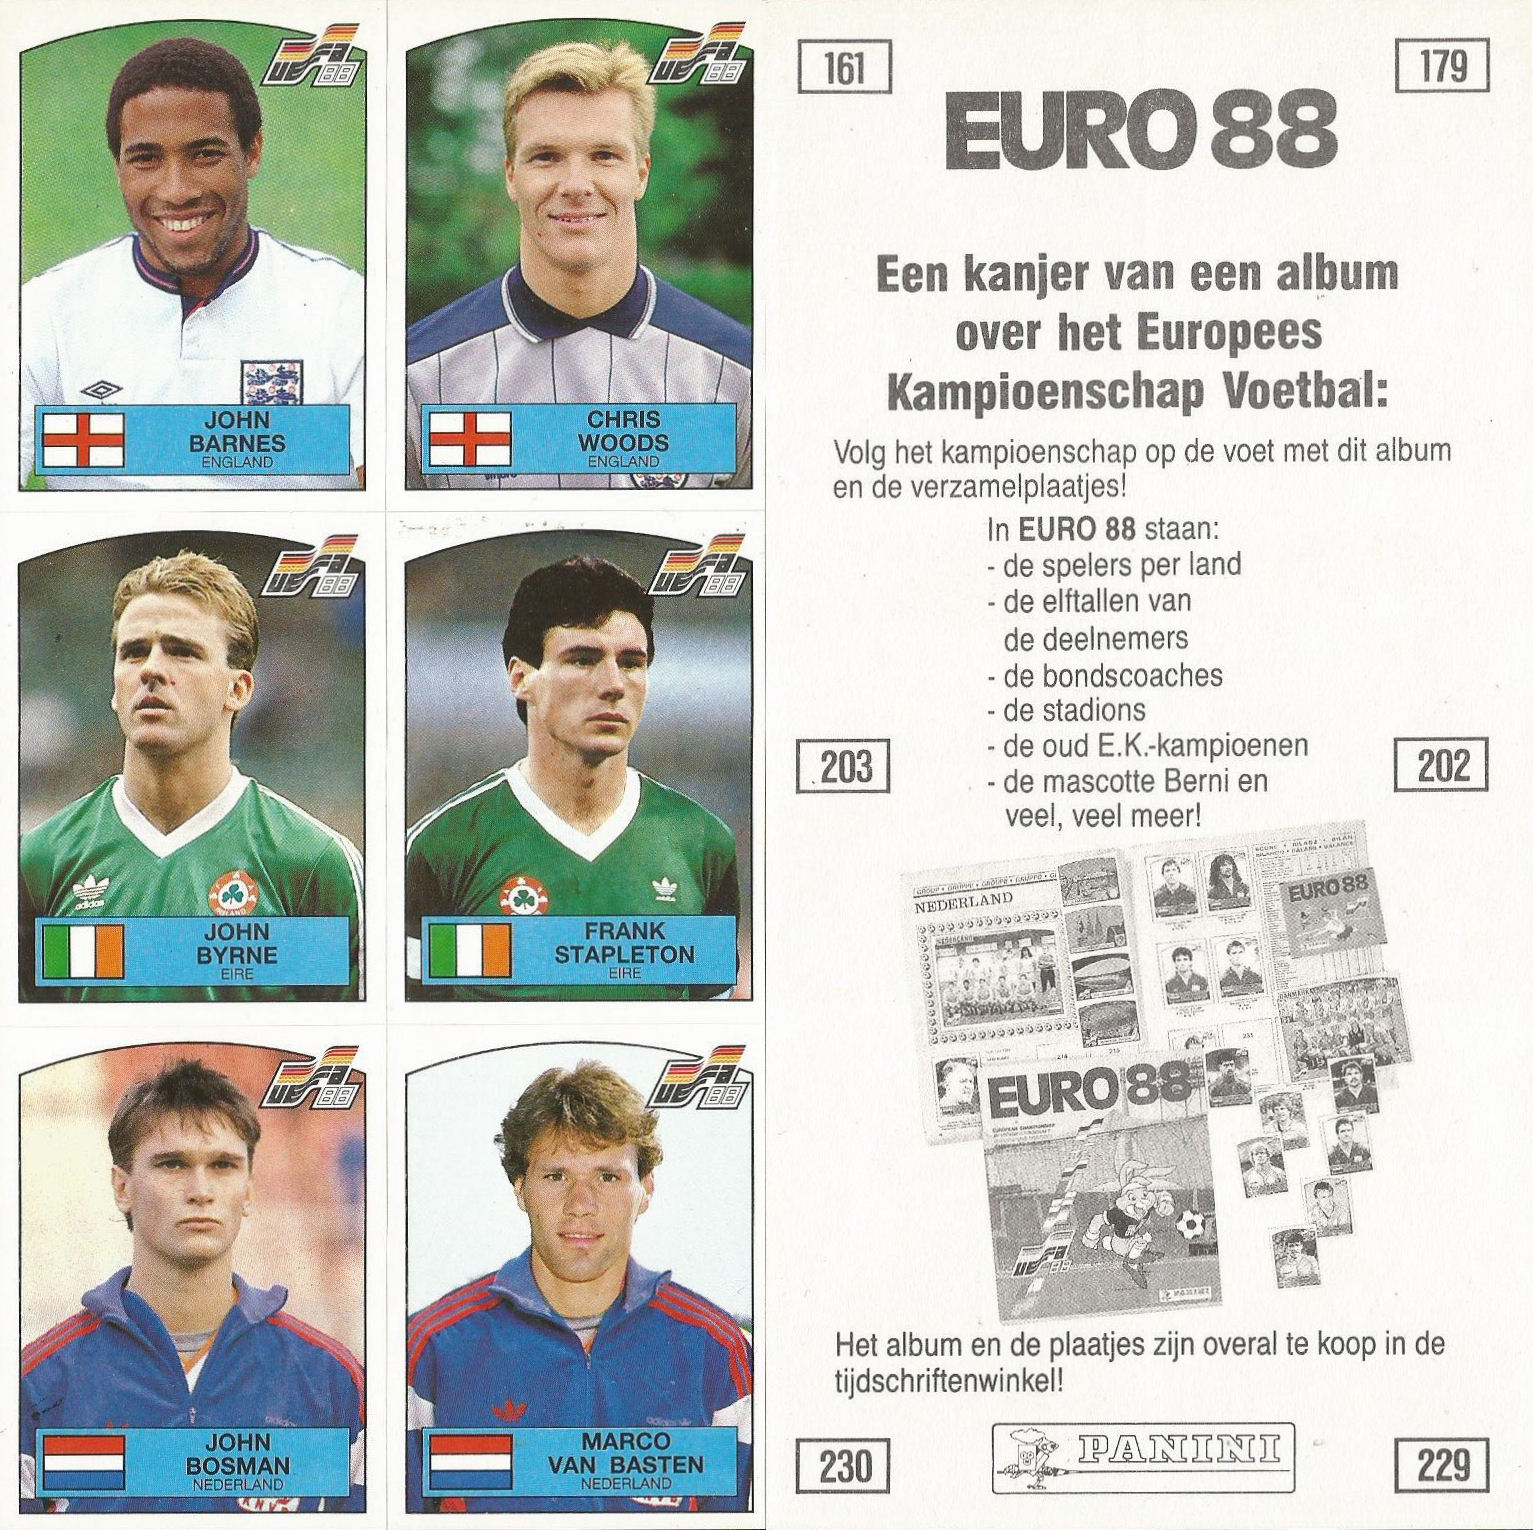 MINT CONDITION!!! Panini EURO 88 N 195 EIRE WHELAN WITH BACK VERY GOOD 